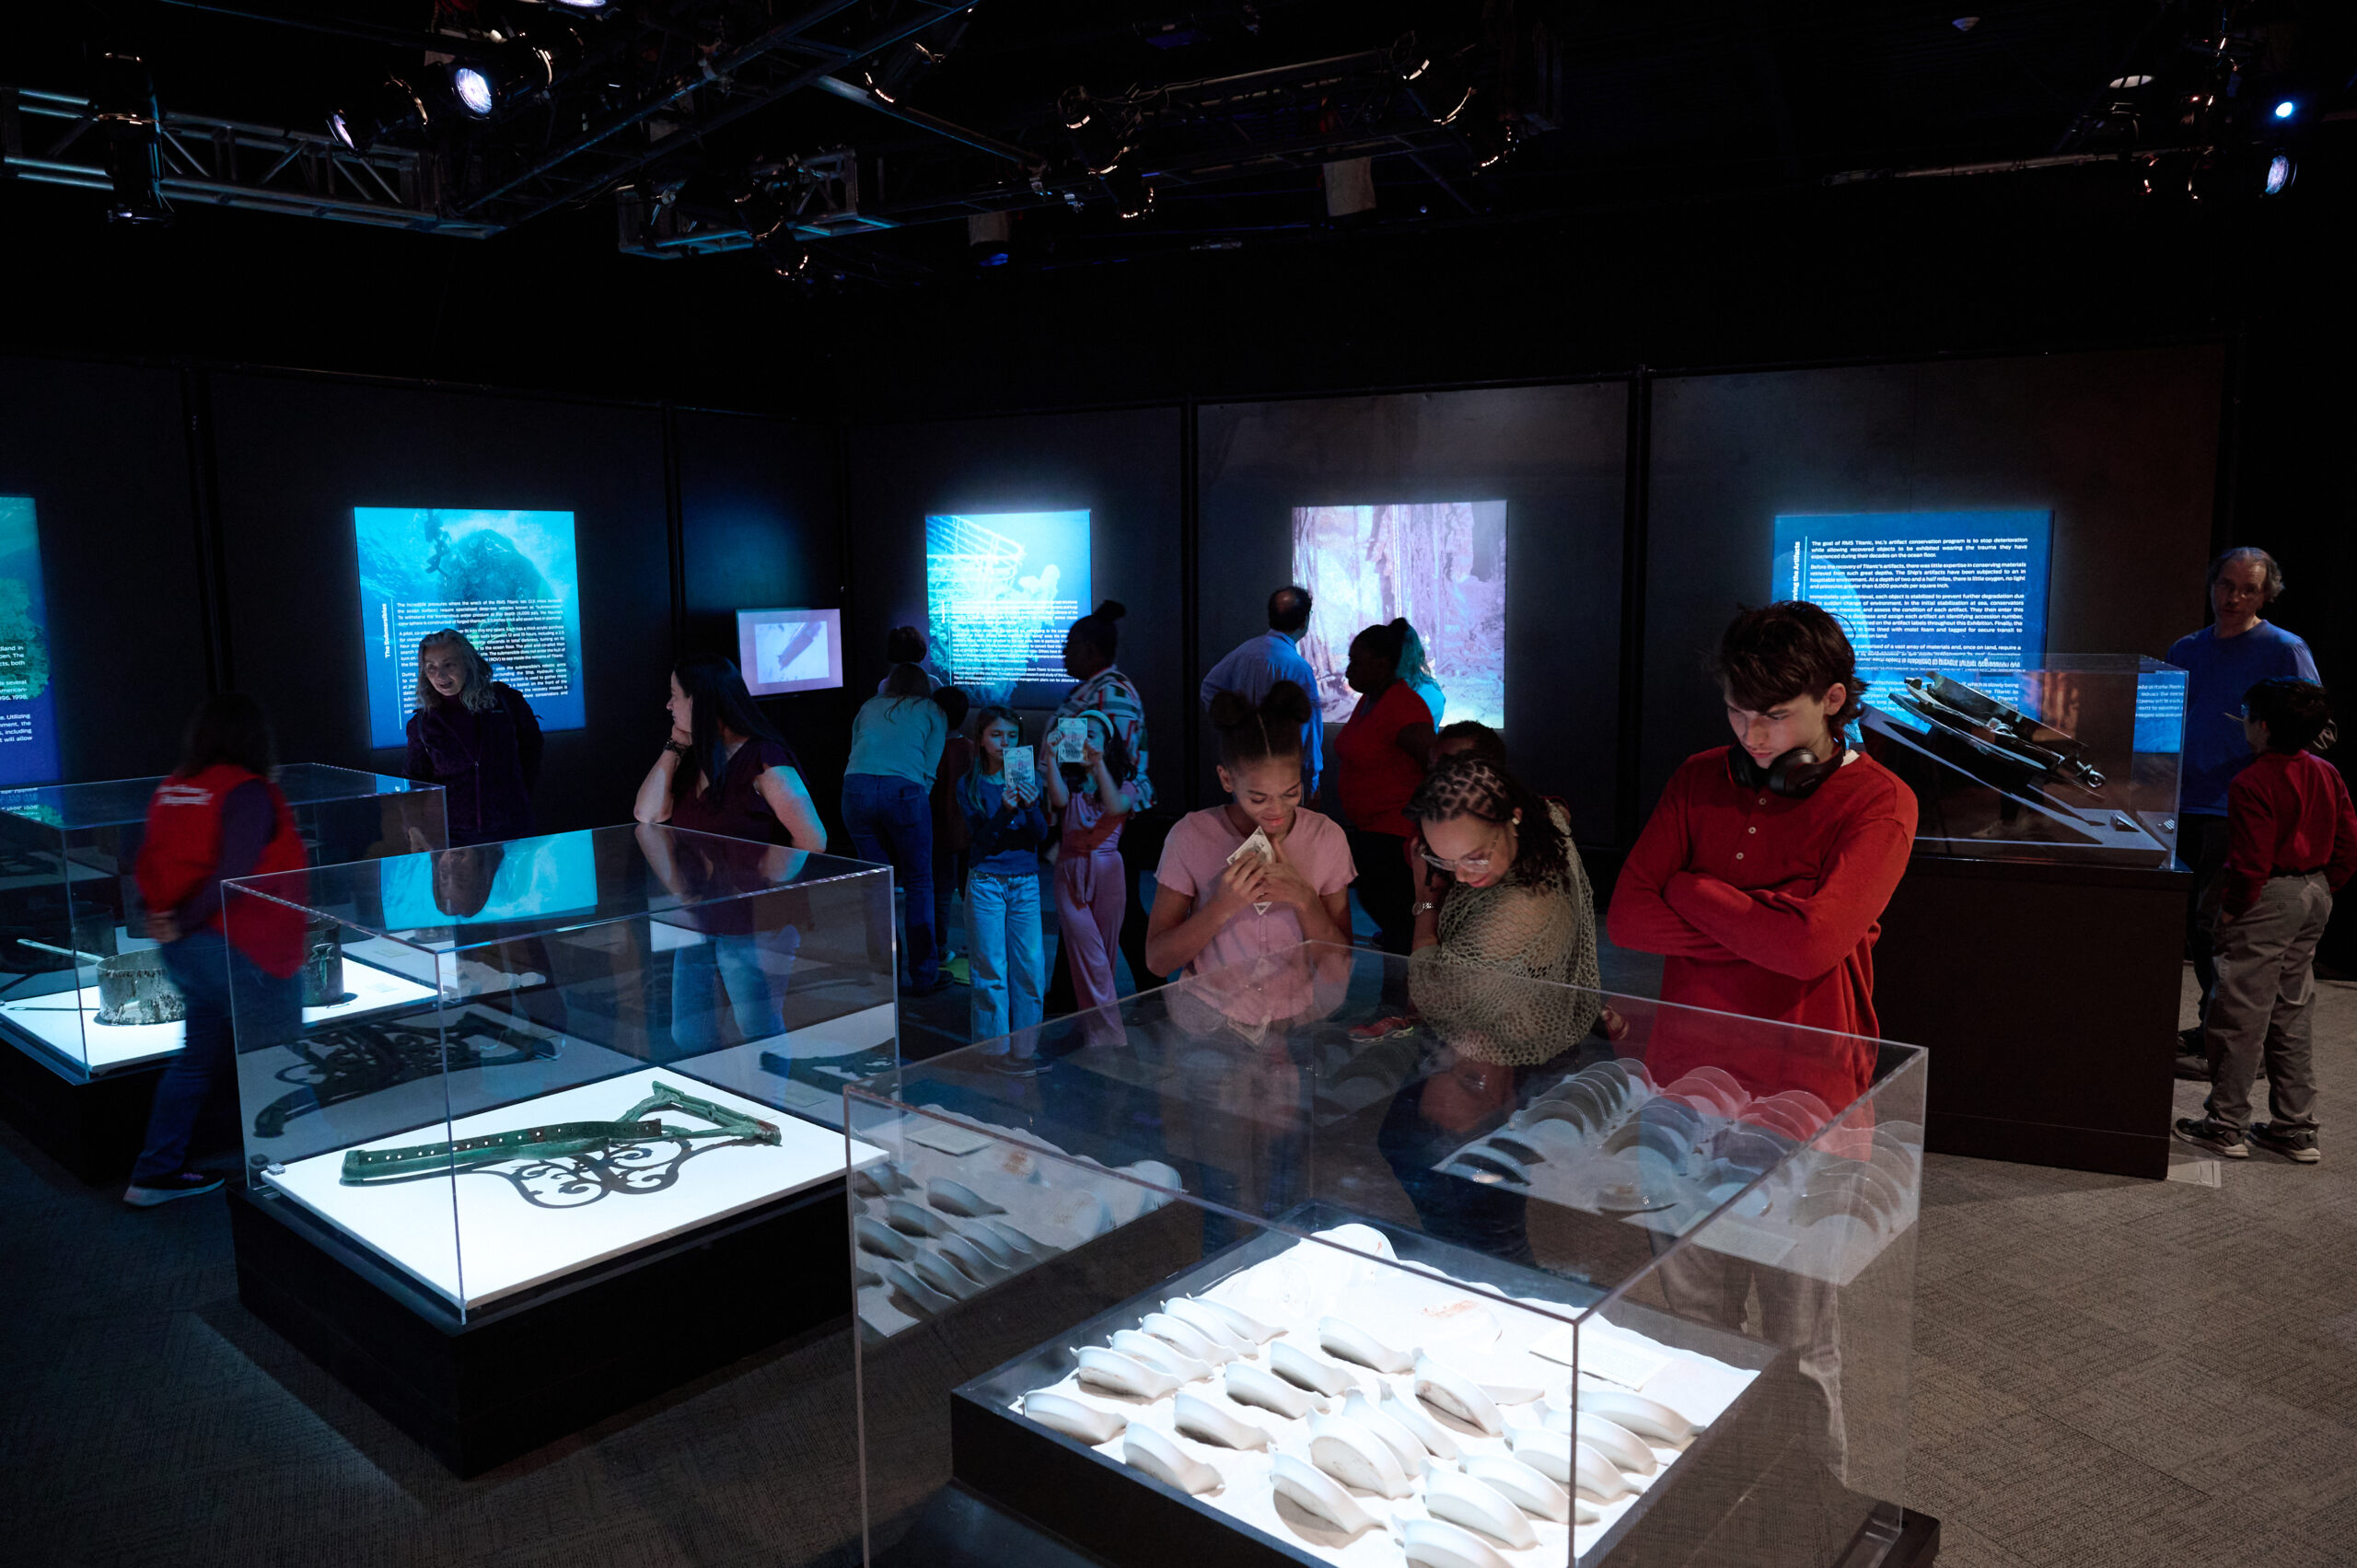 A photo of people looking at artifacts in a dark room, while others look at text and images on the walls.